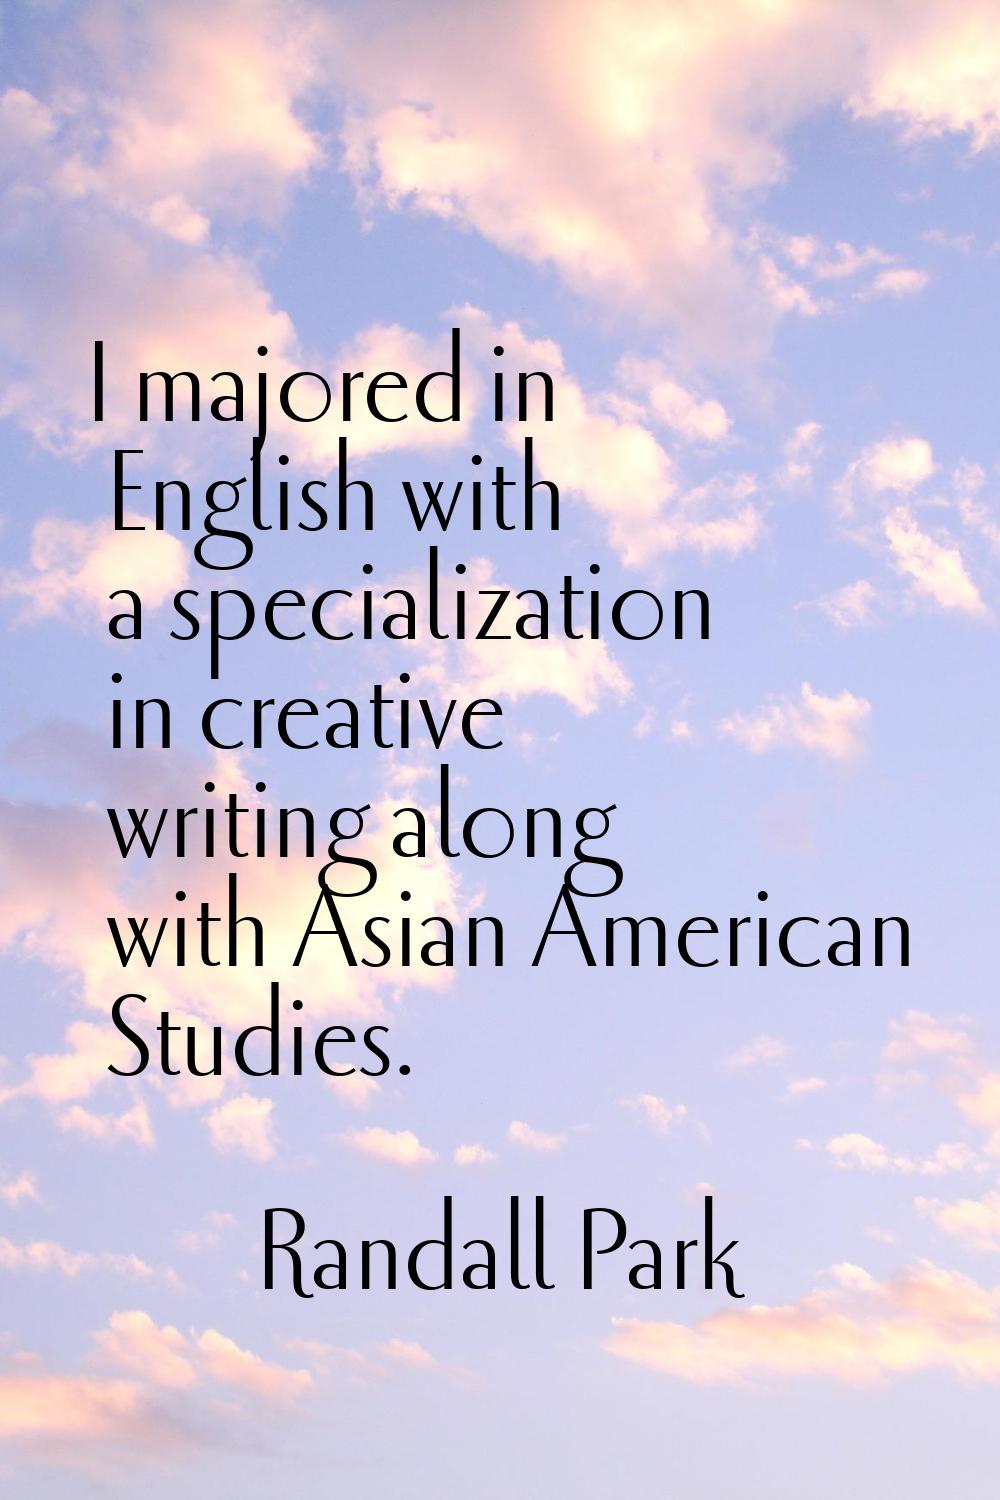 I majored in English with a specialization in creative writing along with Asian American Studies.